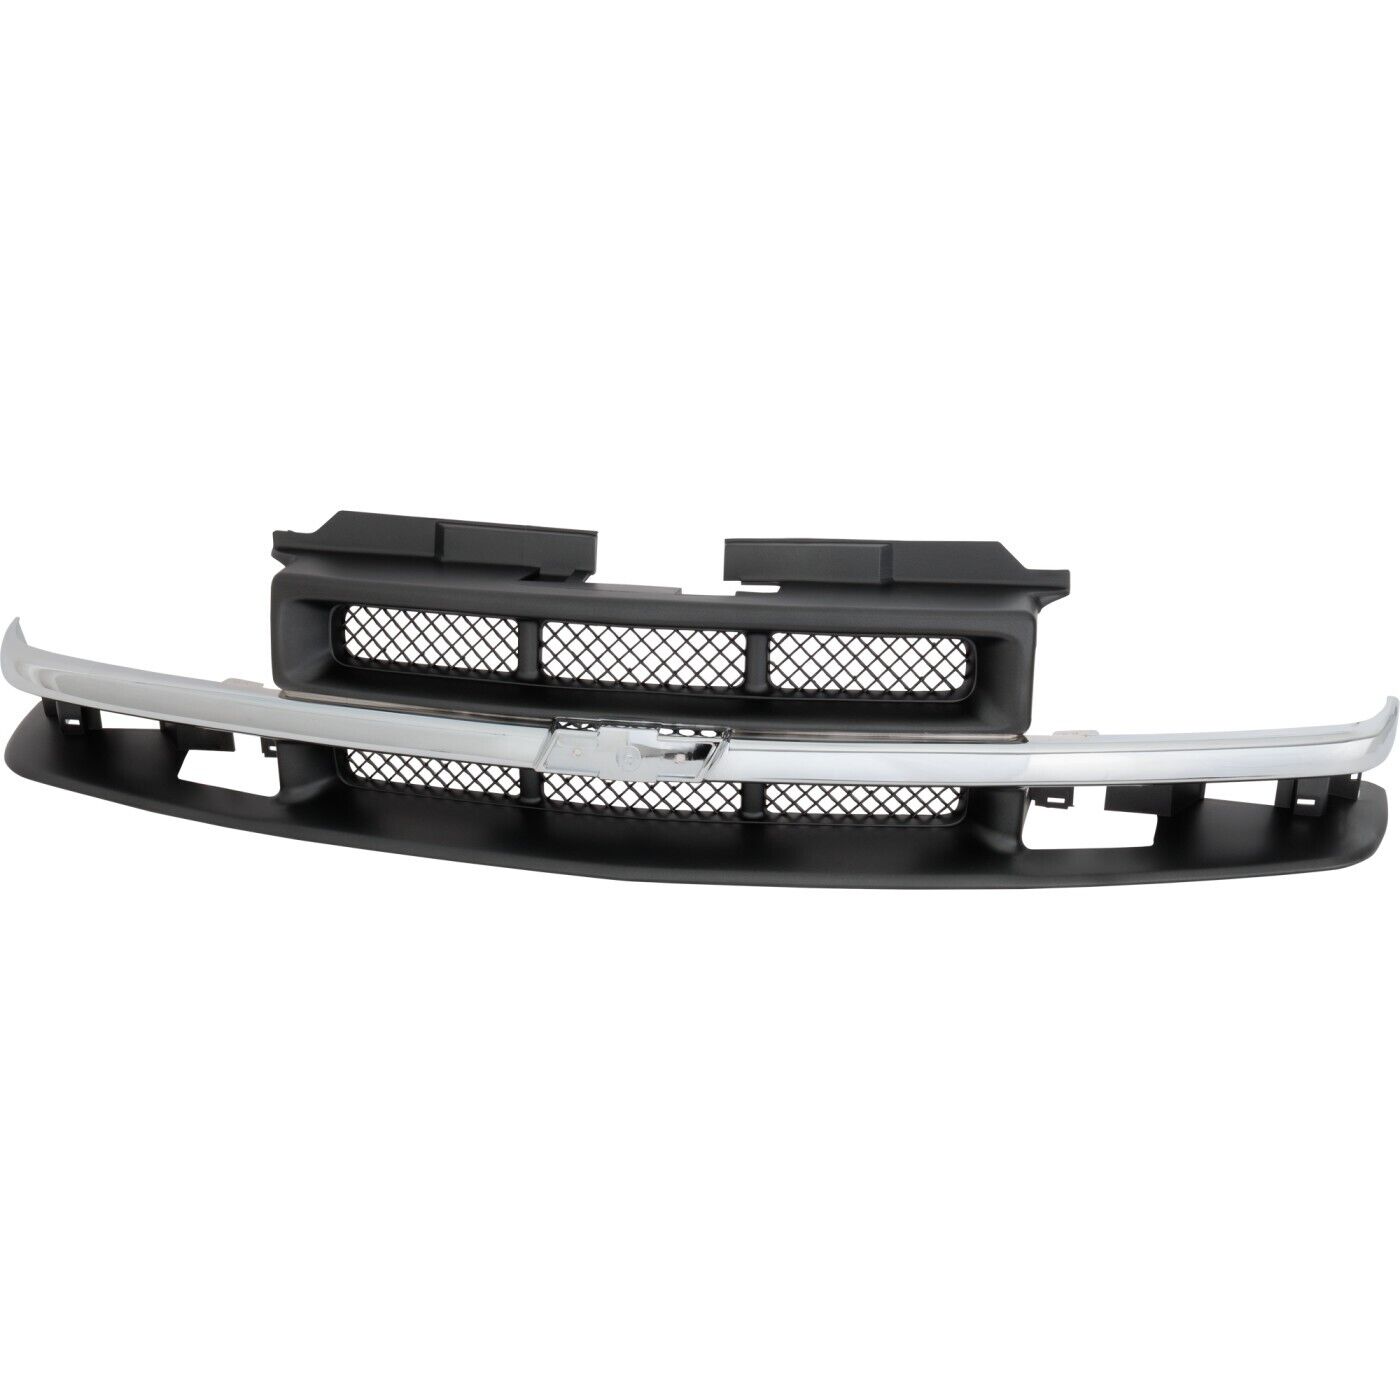 Grille Grill for Chevy S10 Pickup  15048519 Chevrolet S-10 Blazer 1998-2004